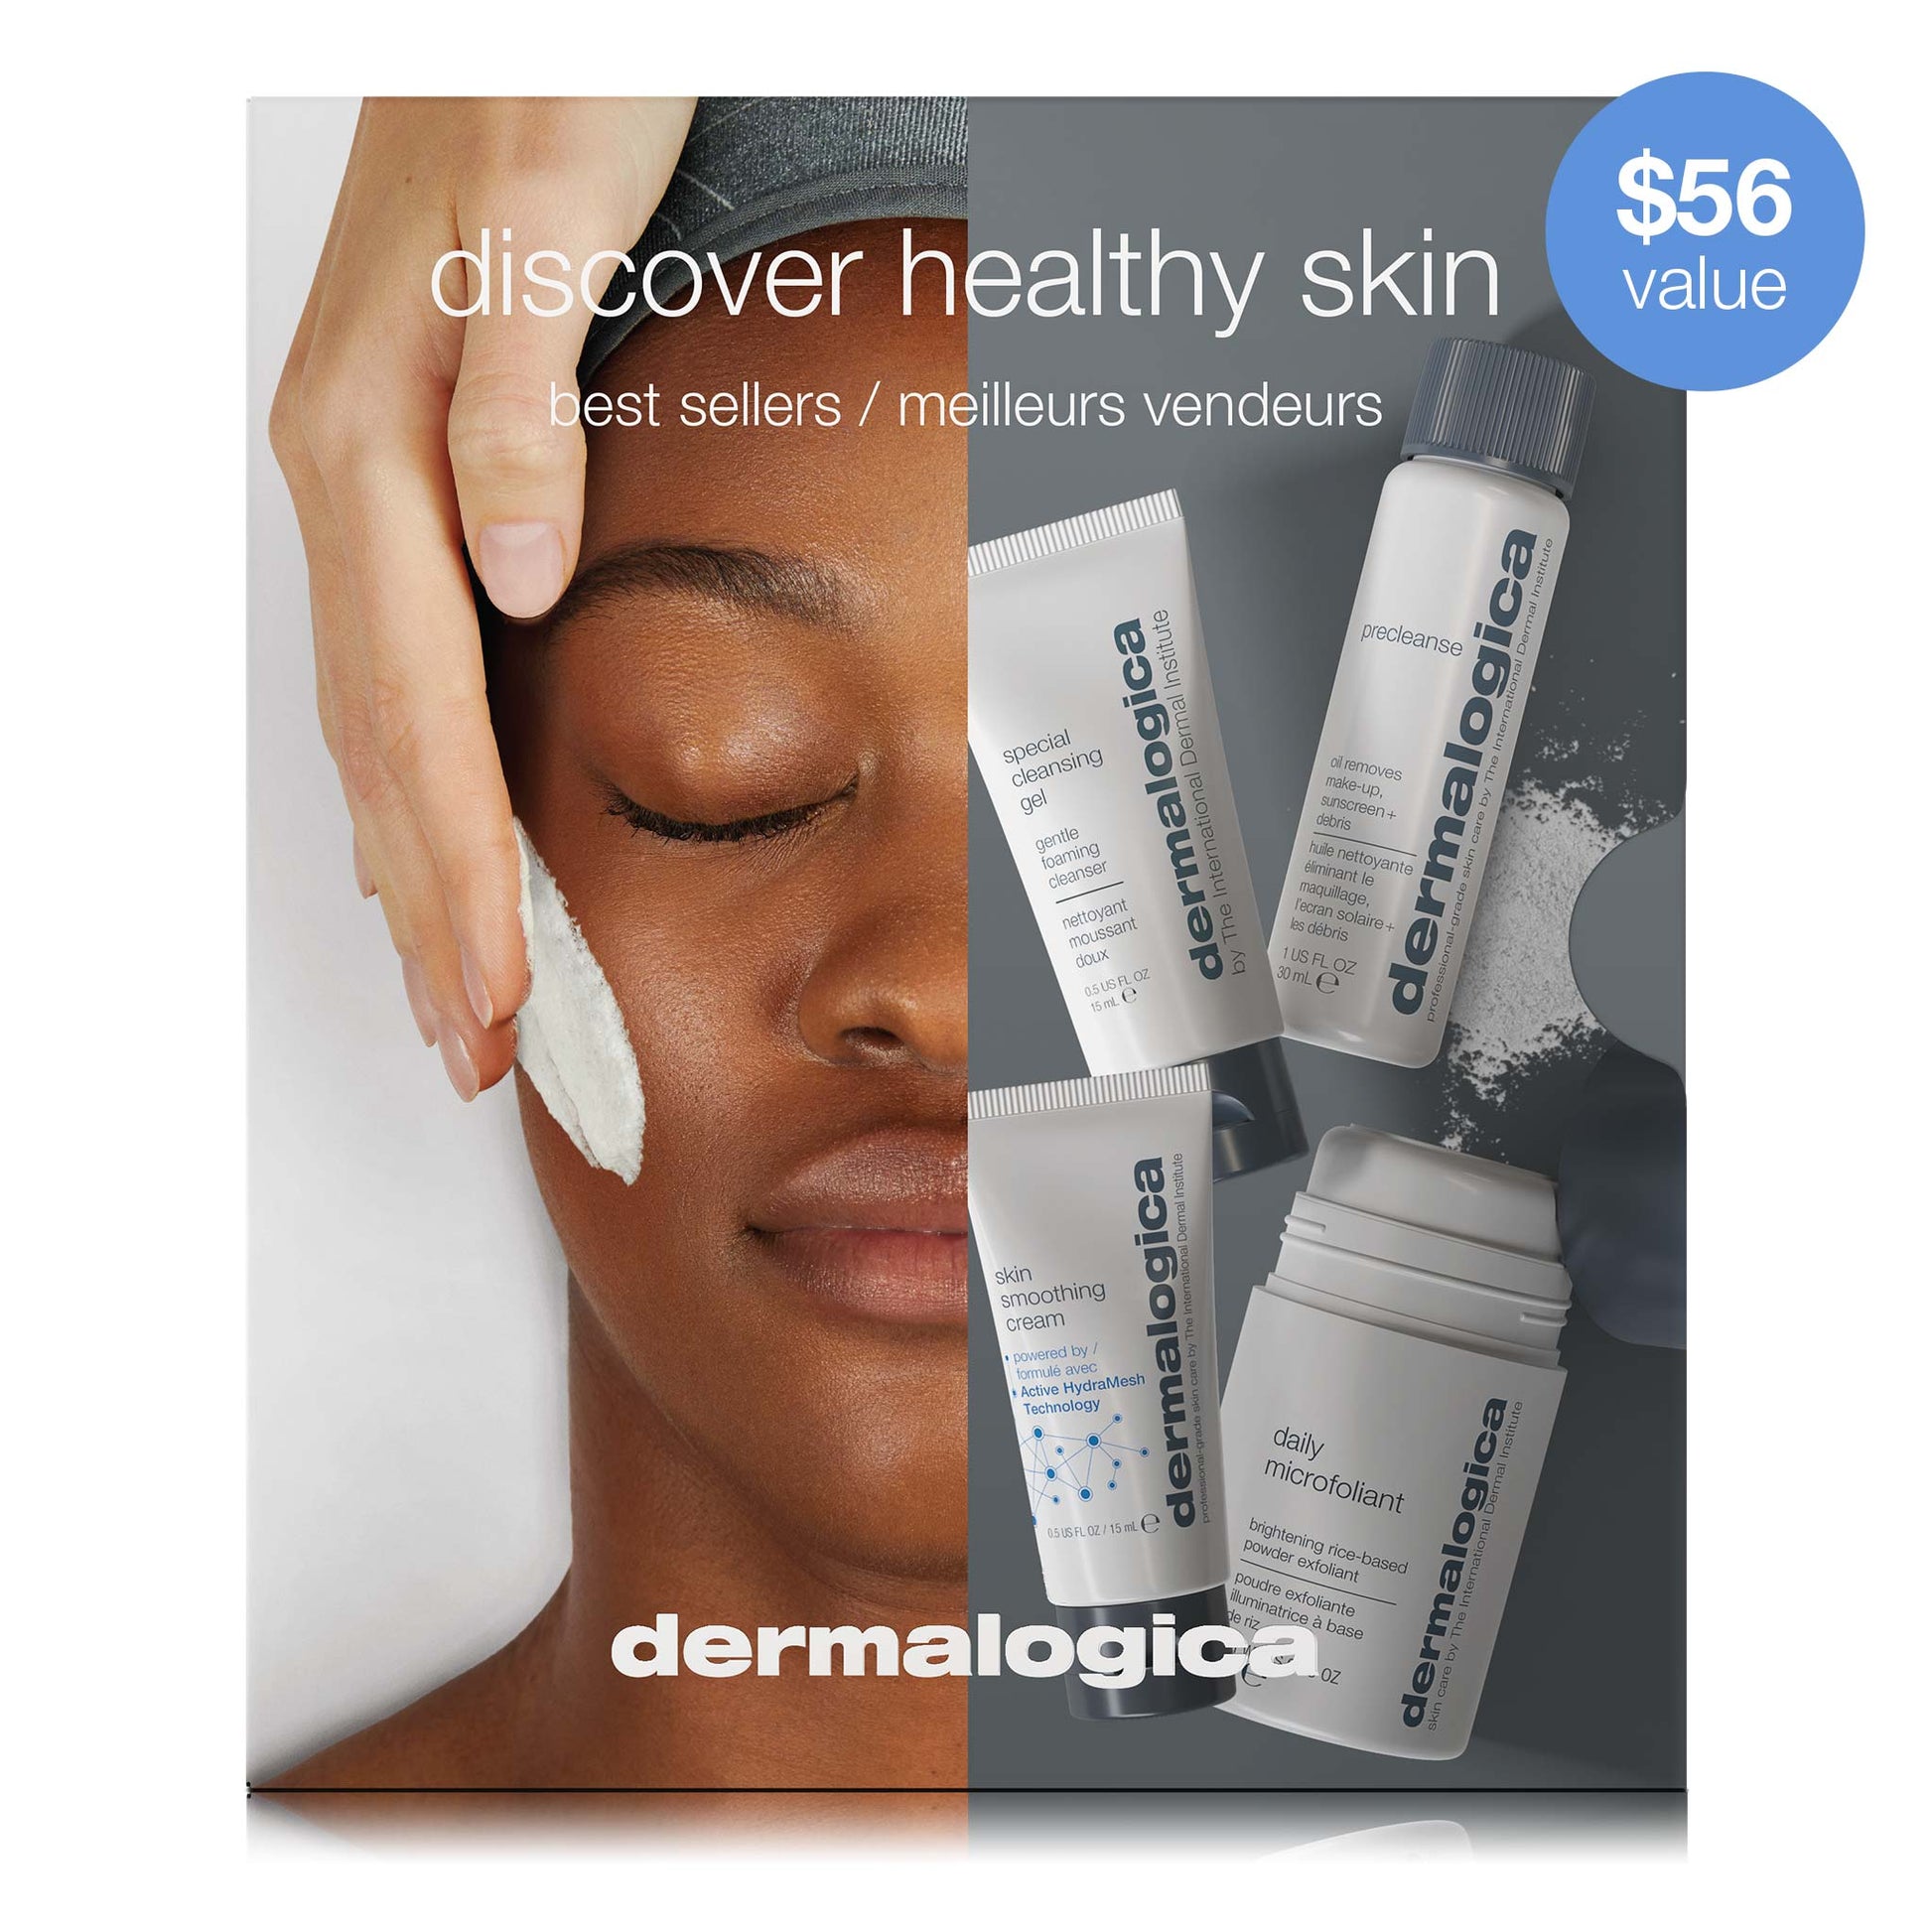 Discover Healthy Skin Kit, Daily Skin Health with Best Sellers